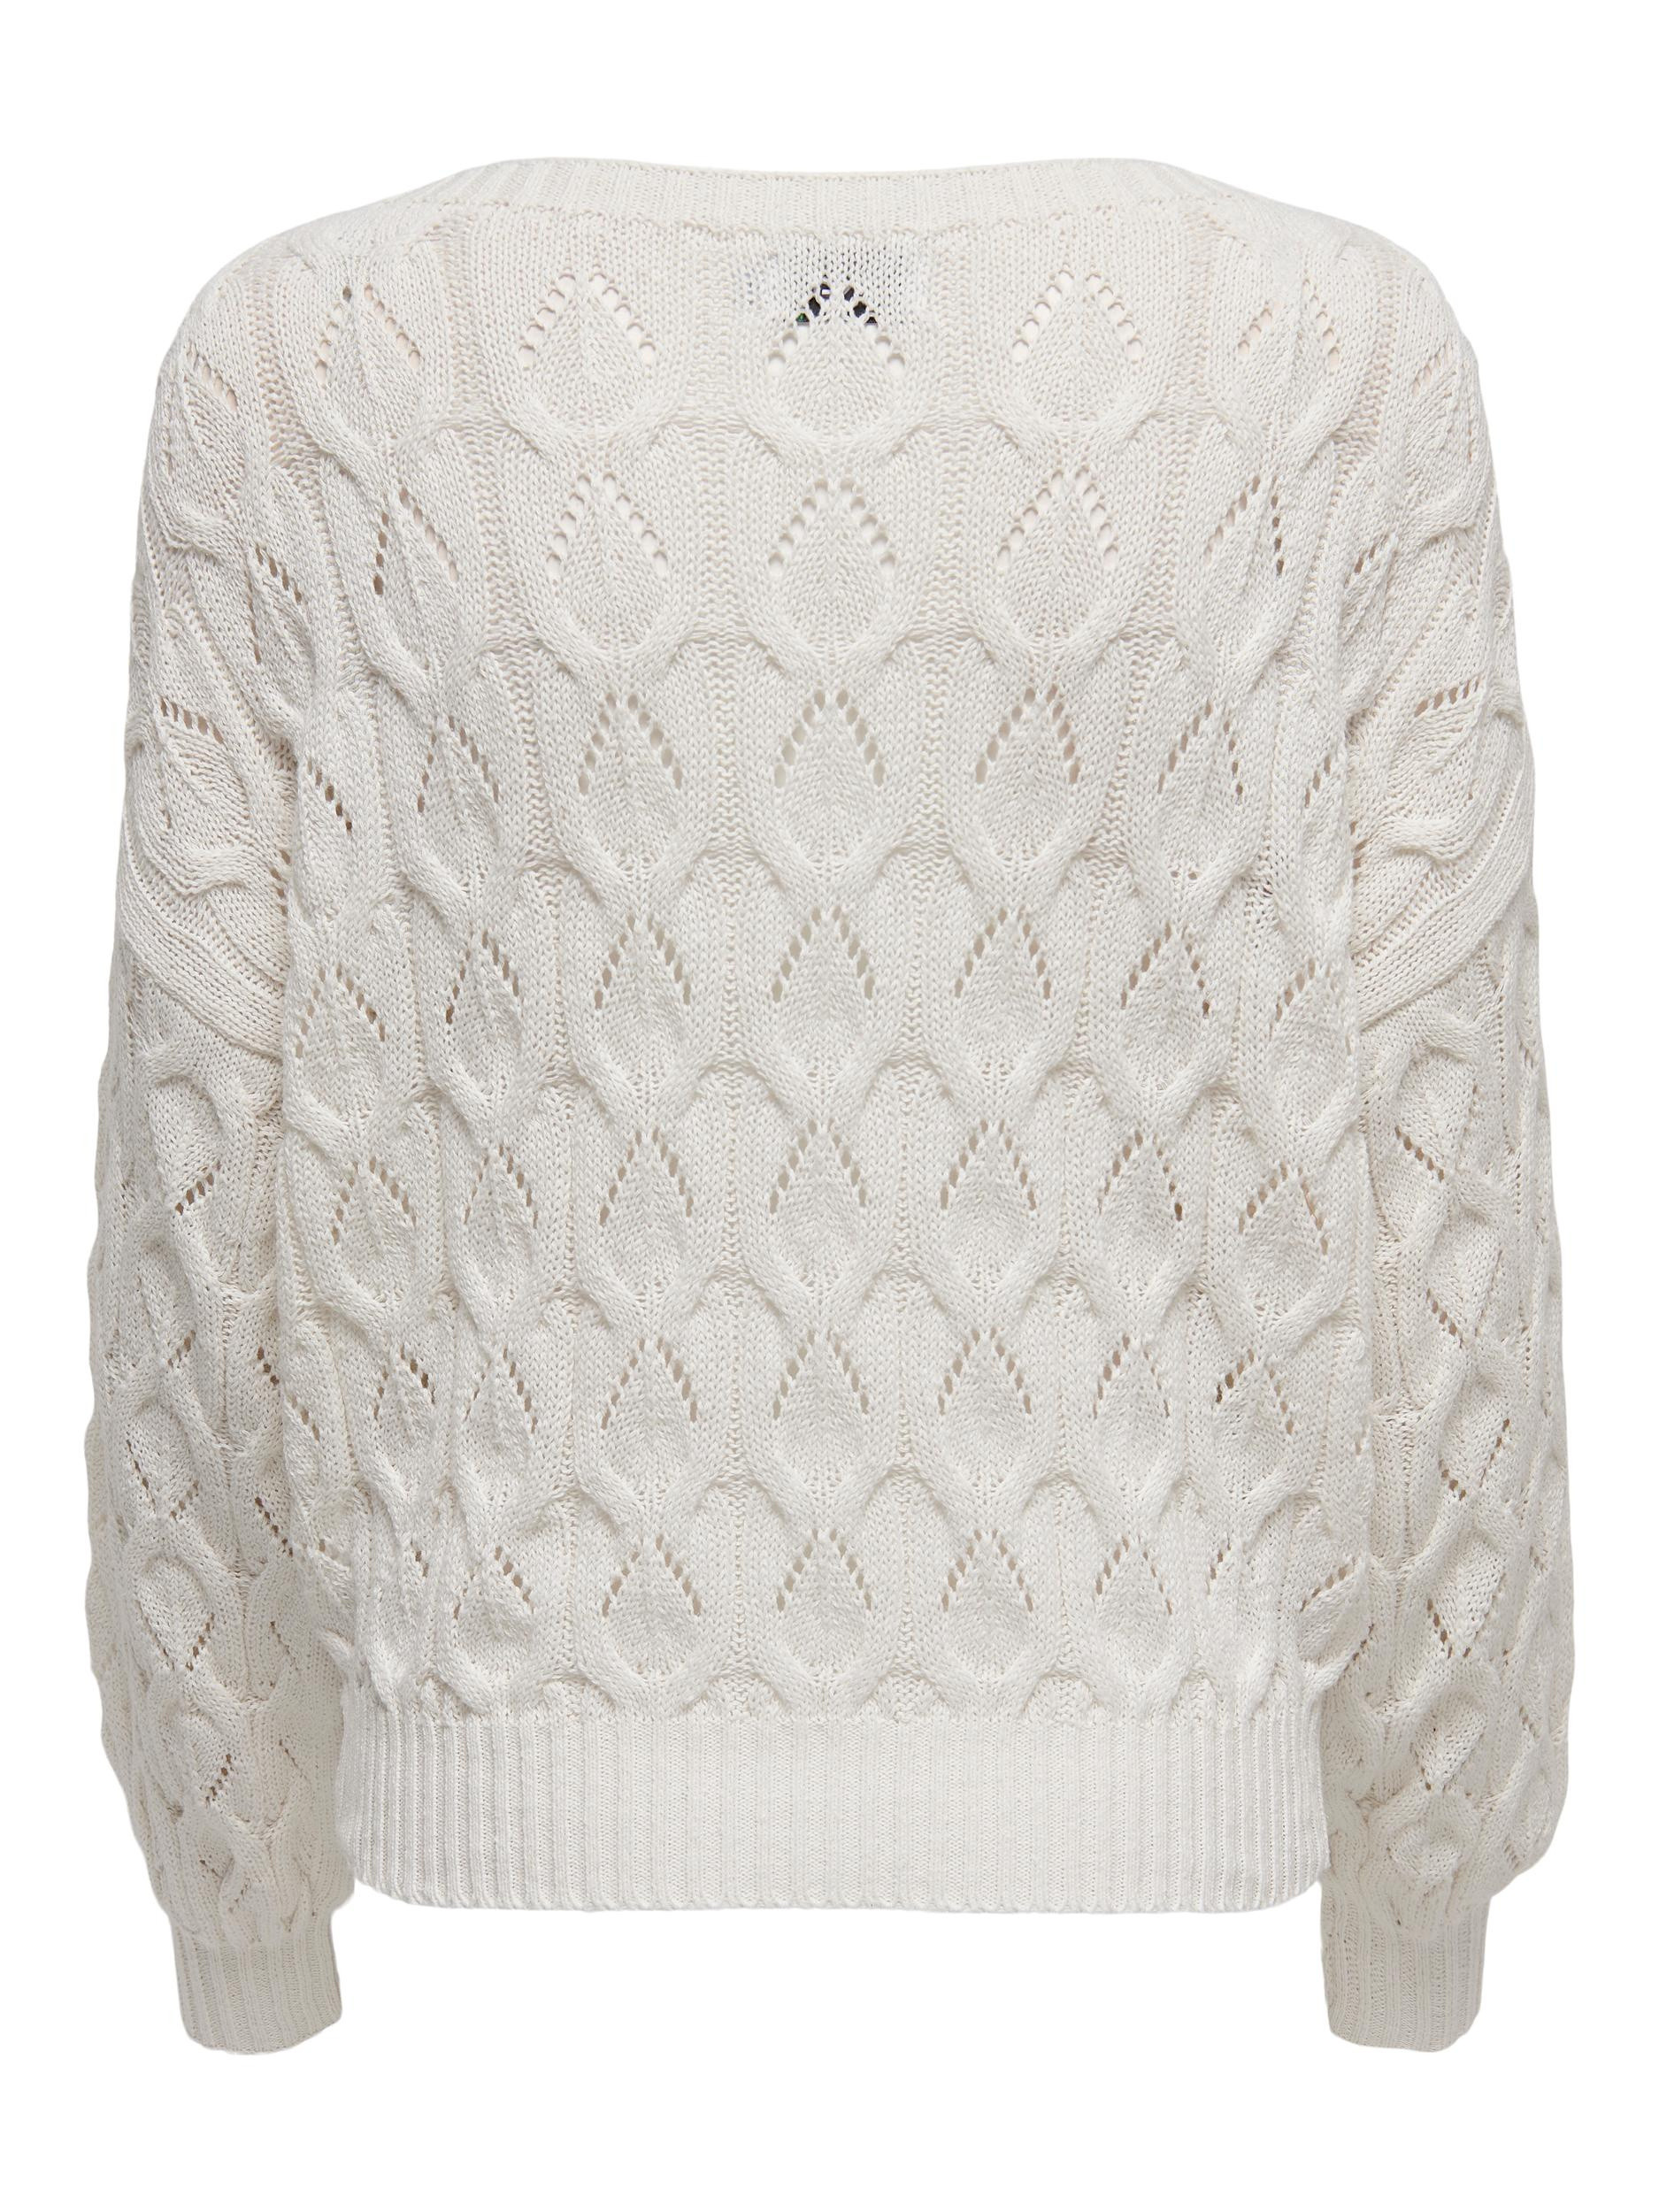 Only - Boat neck pullover with pointelle detail, White, large image number 1